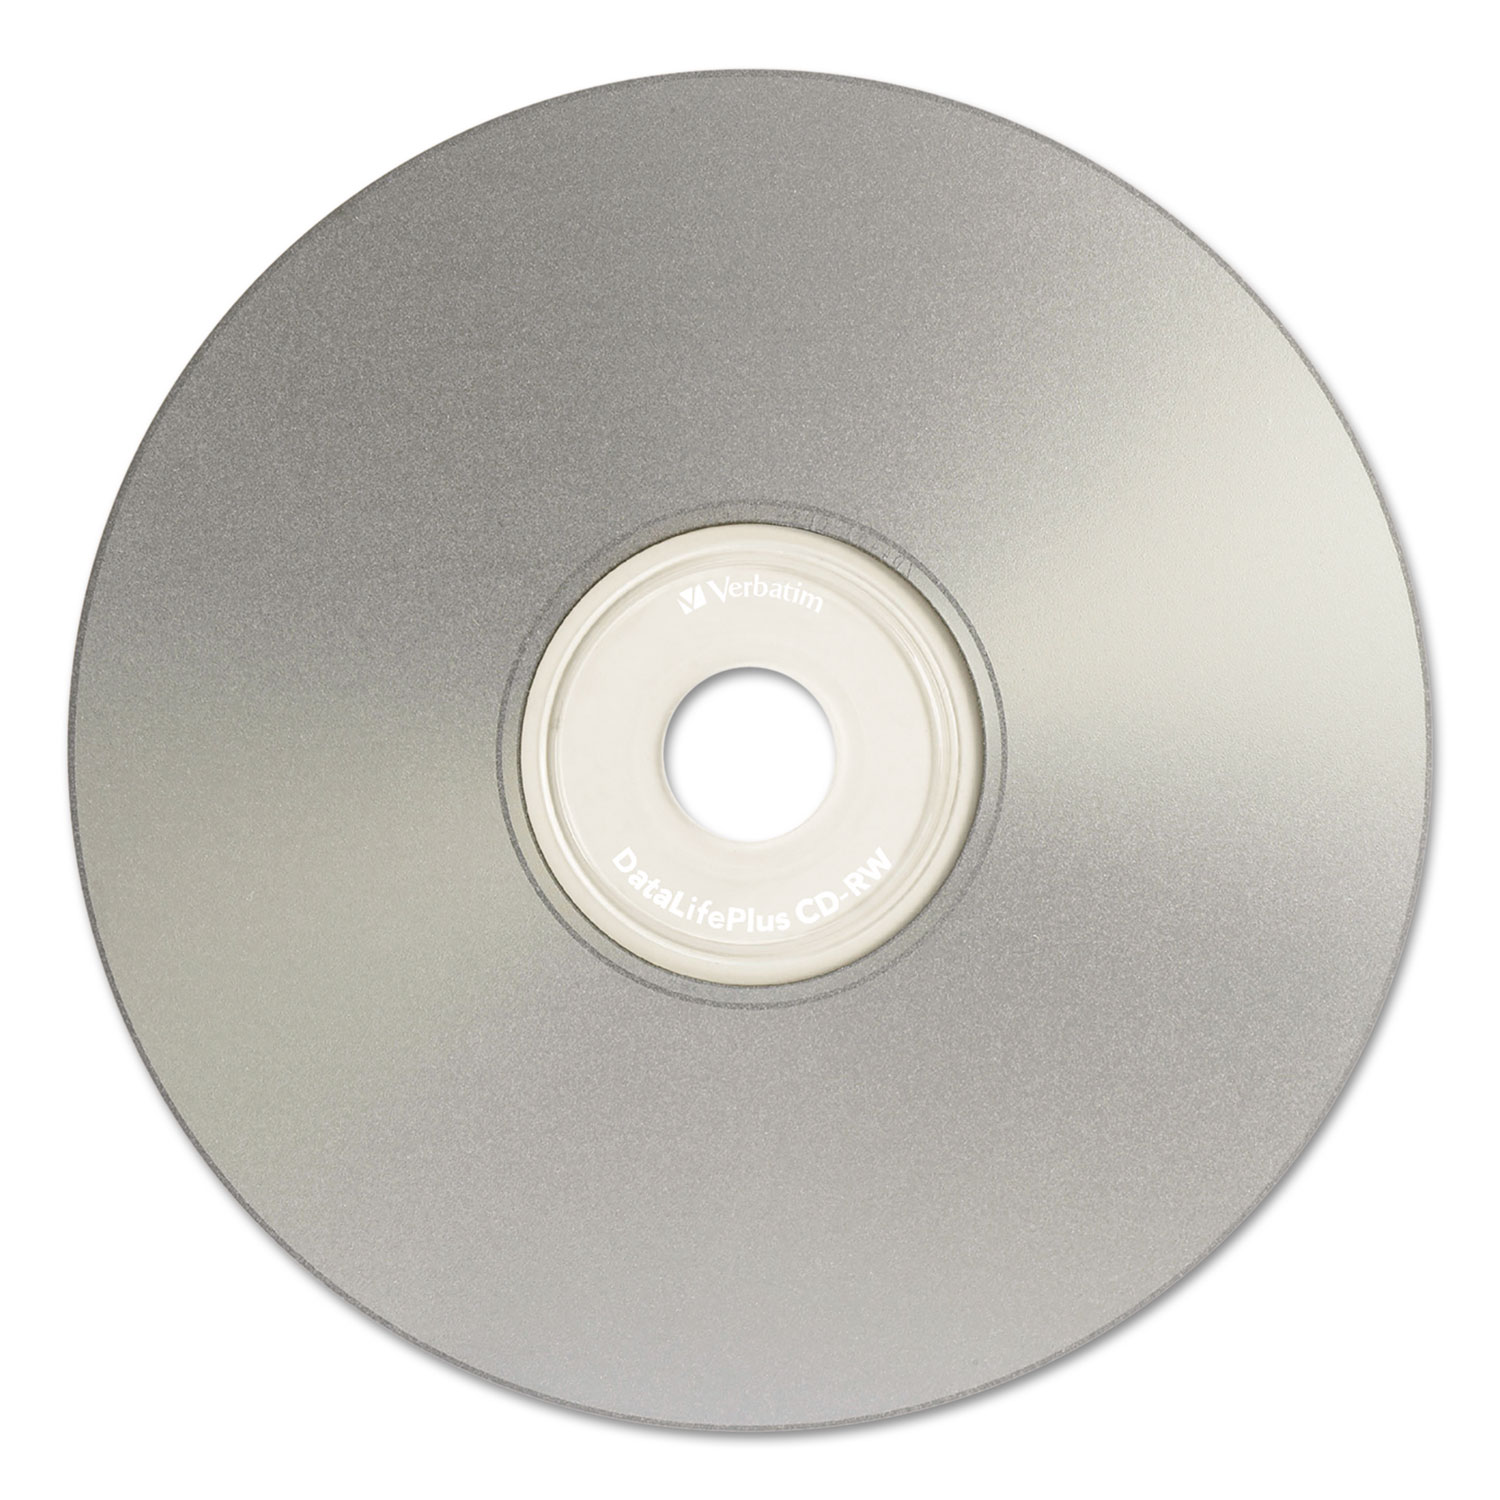 CD-RW Discs, Printable, 700MB/80min, 4x, Spindle, Silver, 50/Pack